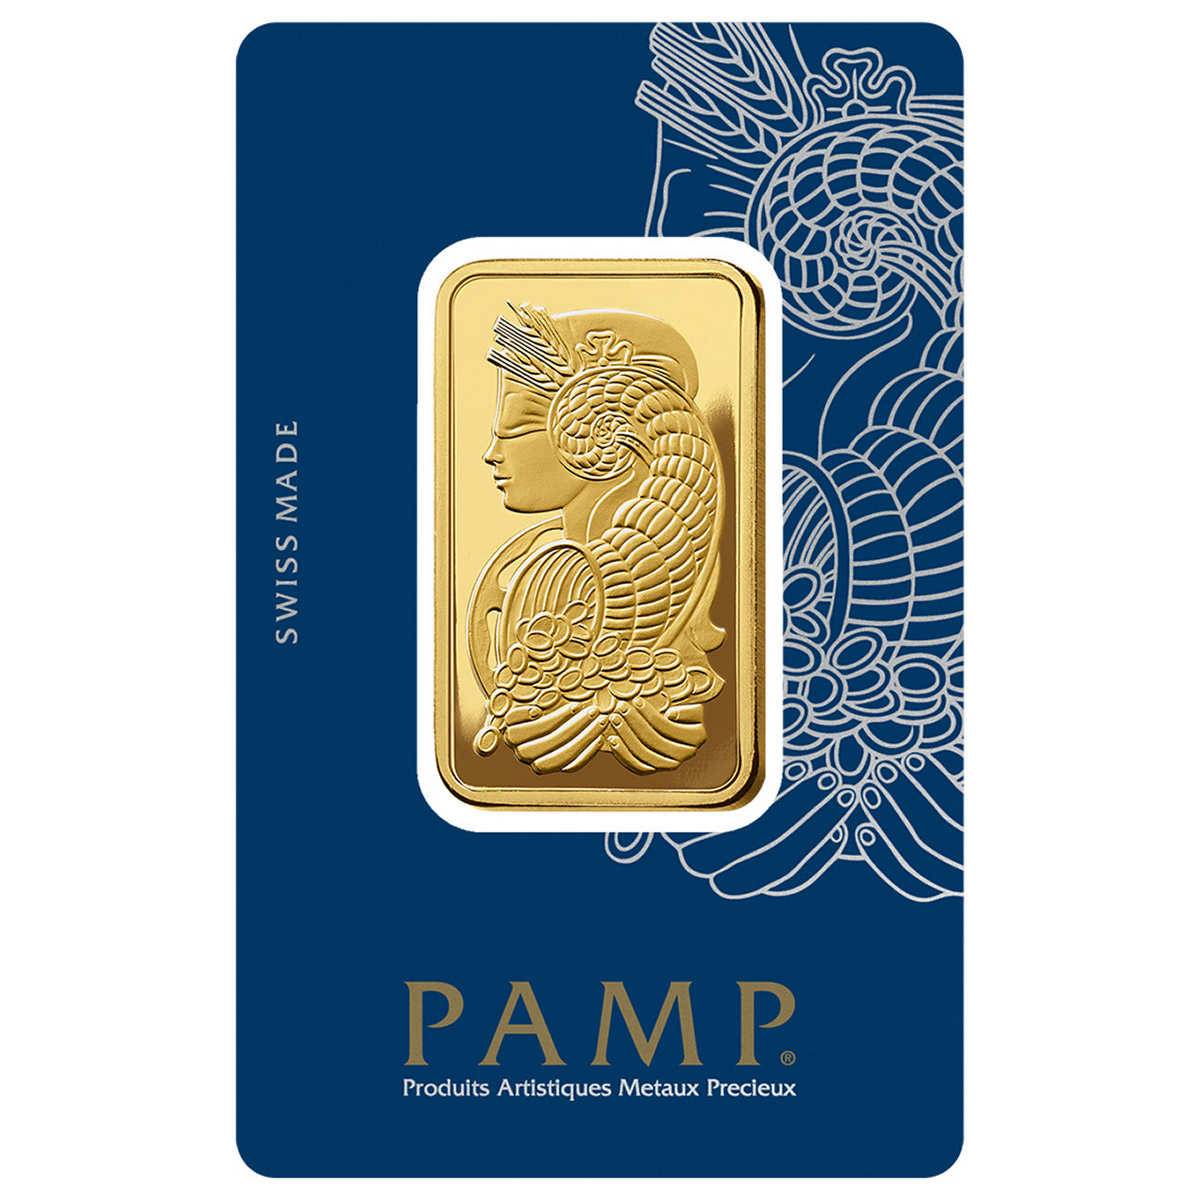 1 oz Gold Bar PAMP Suisse Lady Fortuna Veriscan (New In Assay